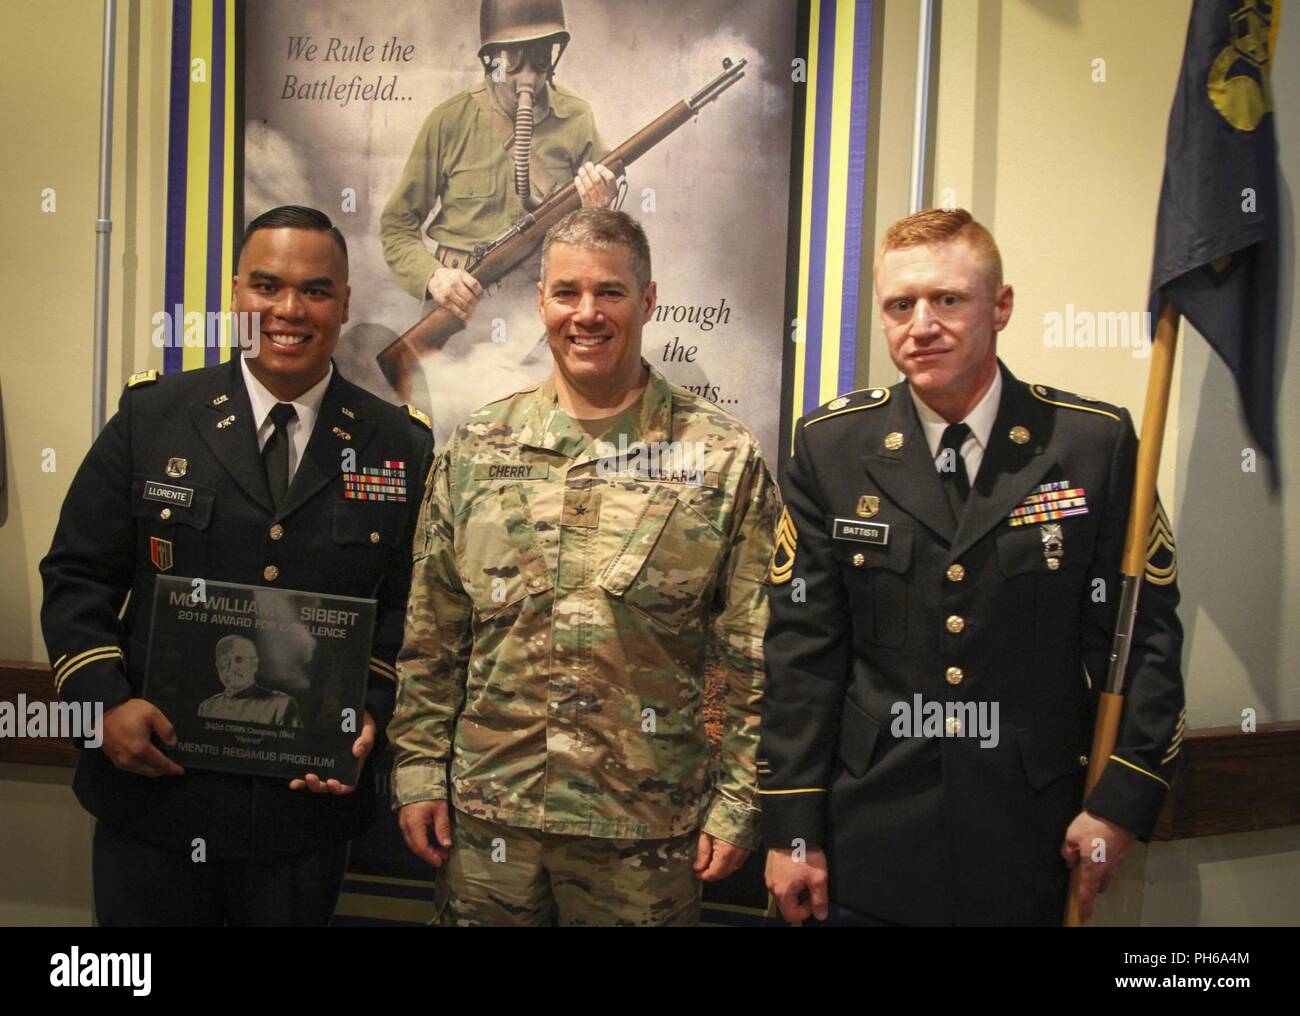 Army Reserve Capt. Lorenzo Llorente II (left), company commander, 342nd Chemical Company, 472nd Chemical Battalion, 209th Regional Support Group, 76th Operational Response Command,  Brig. Gen. Doug Cherry, (center) deputy commanding general, 76th ORC, and Sgt. 1st Class John Baptisti (right), company first sergeant, 342nd Chem. Co., 472nd Chem. Bn., pose for  aphoto together after the 342nd Chemical Company was presented the prestigious Maj. Gen. William L. Sibert award at the Baker Theater on Fort Leonard Wood, Missouri during the 100th anniversary of the Chemical Corps June 28.  This is the  Stock Photo